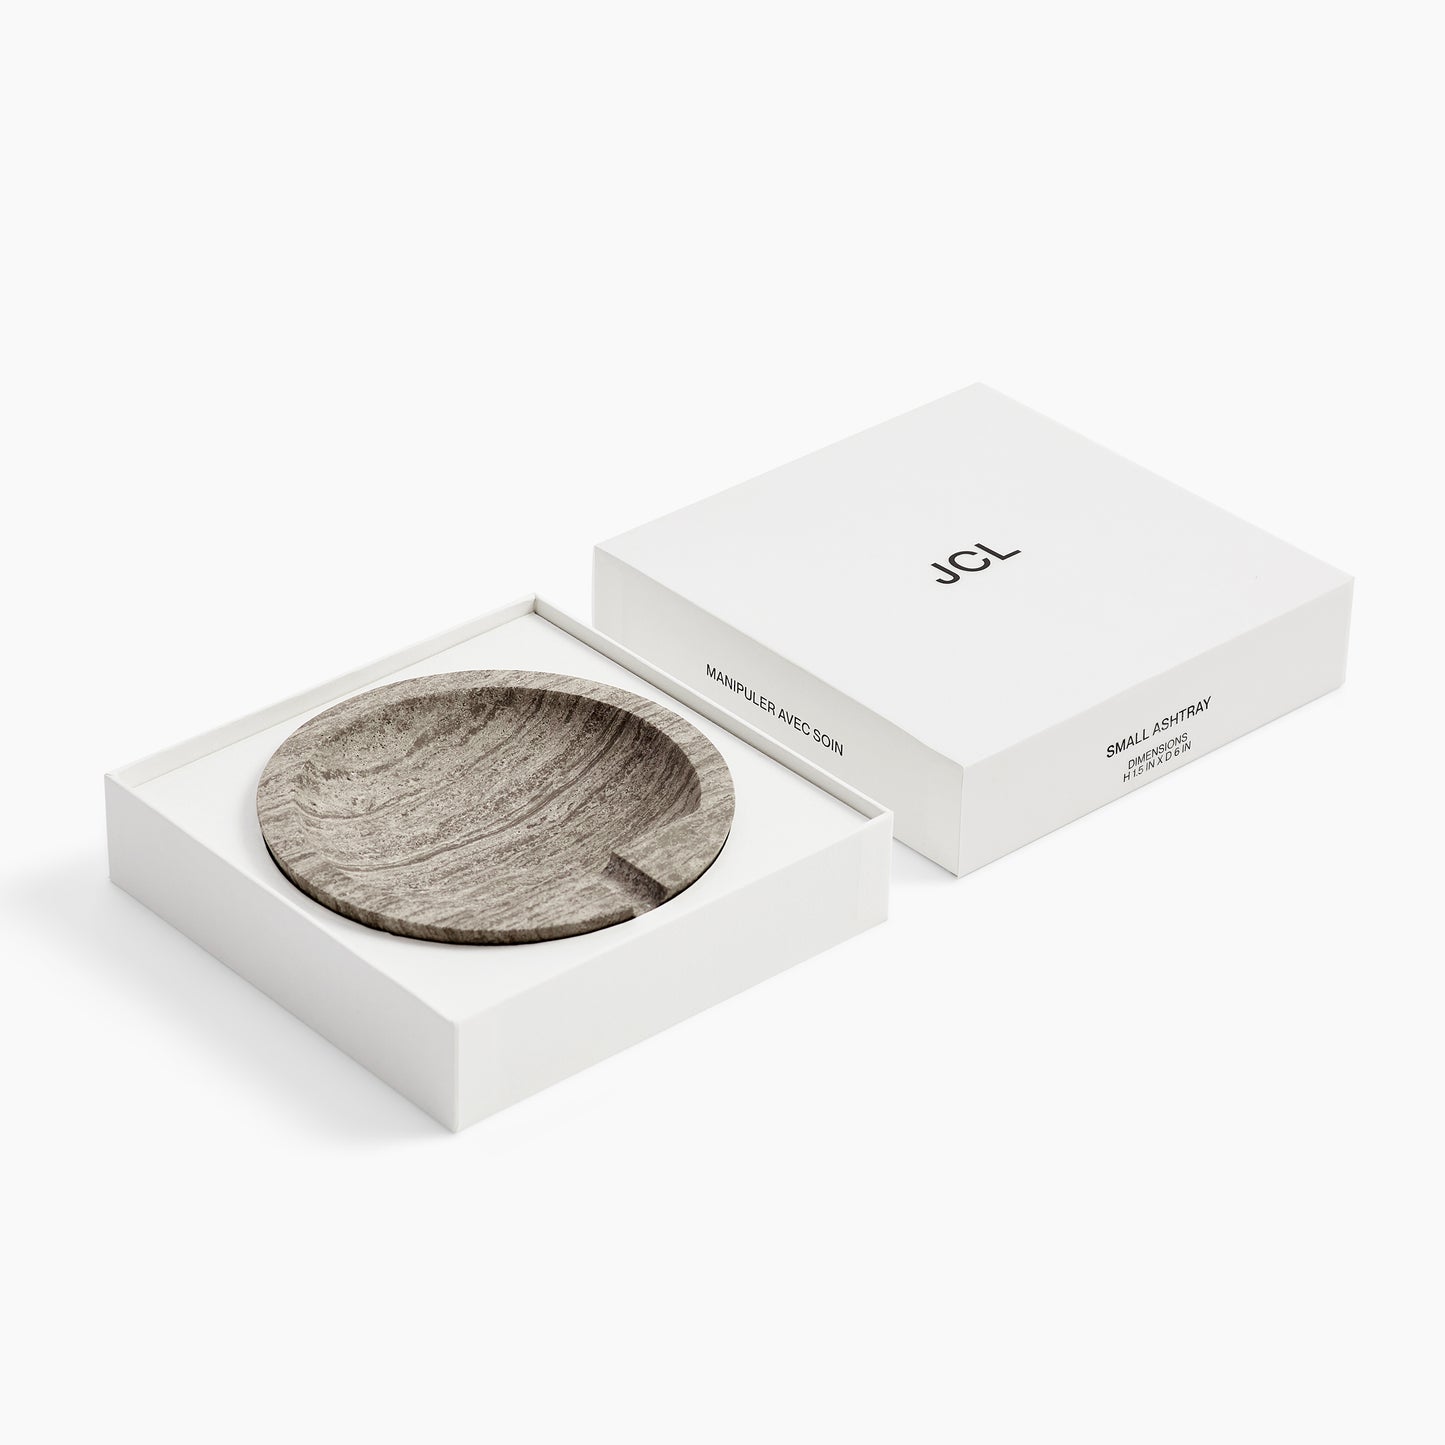 SMALL ASHTRAY IN GREY ATHENS MARBLE